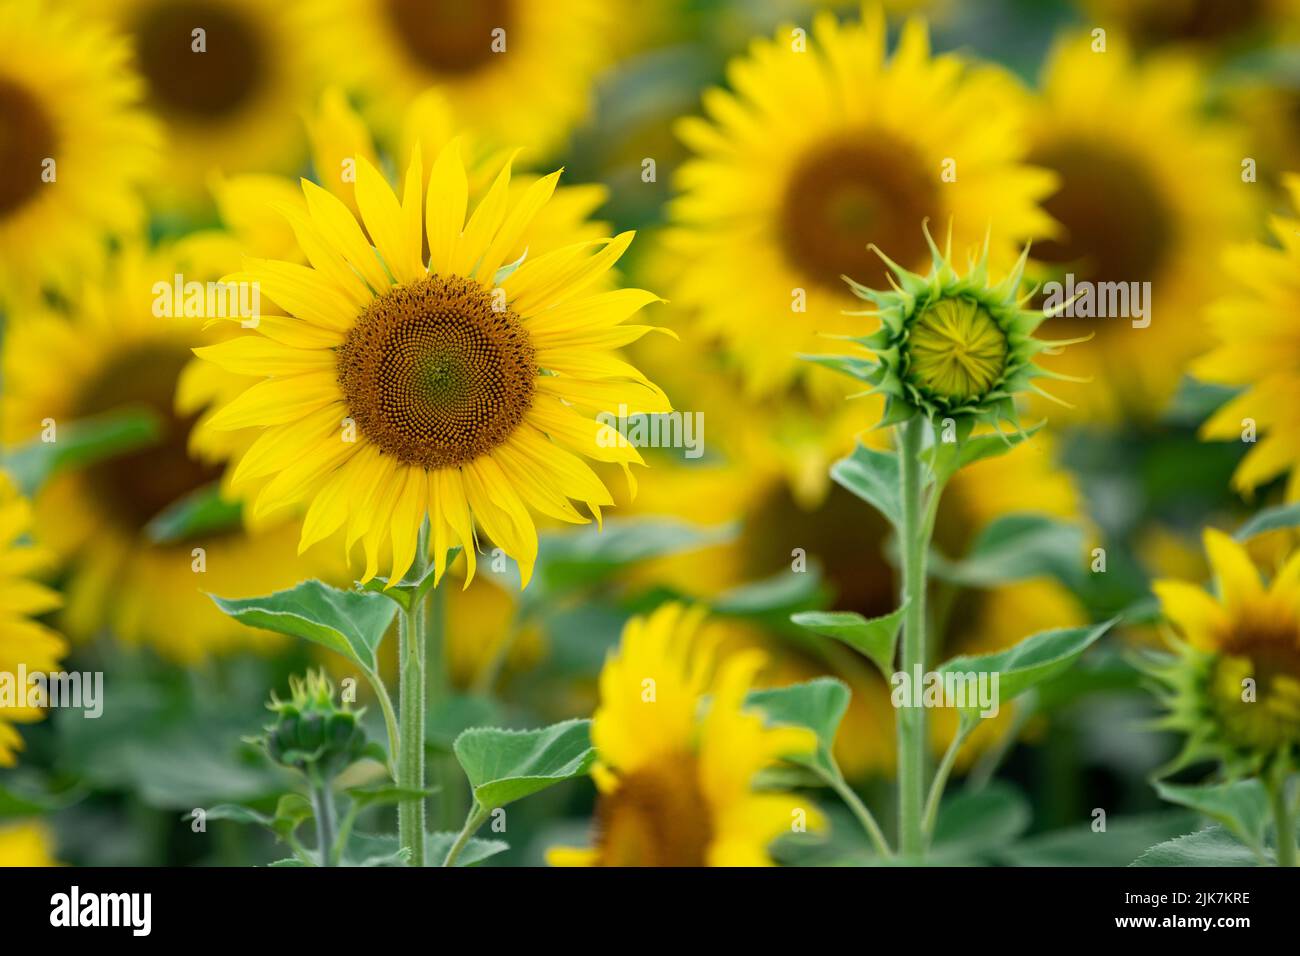 Young not opened sunflower head on field of yellow sunflowers background Stock Photo